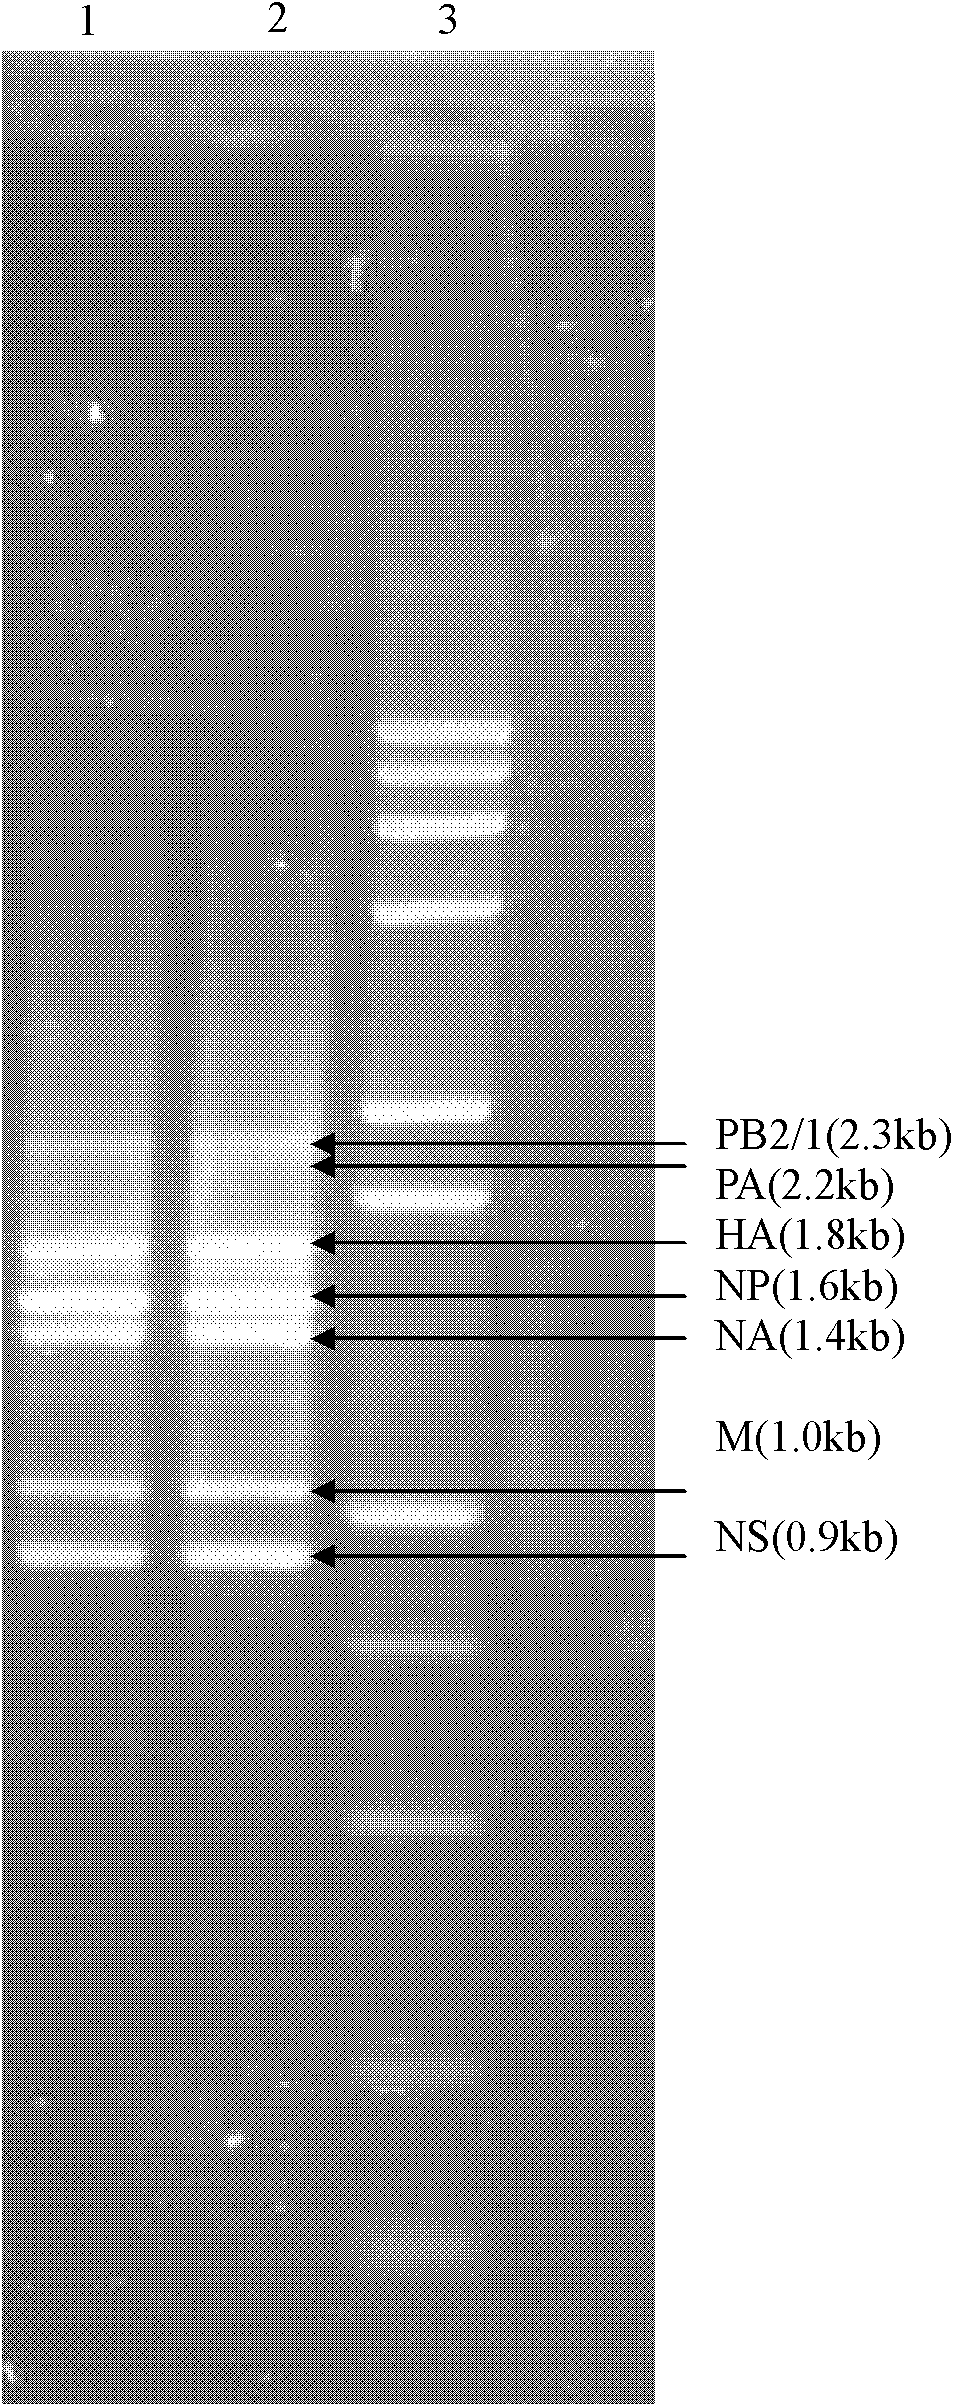 Method for obtaining influenza virus nucleic acid in influenza sample and special primer thereof